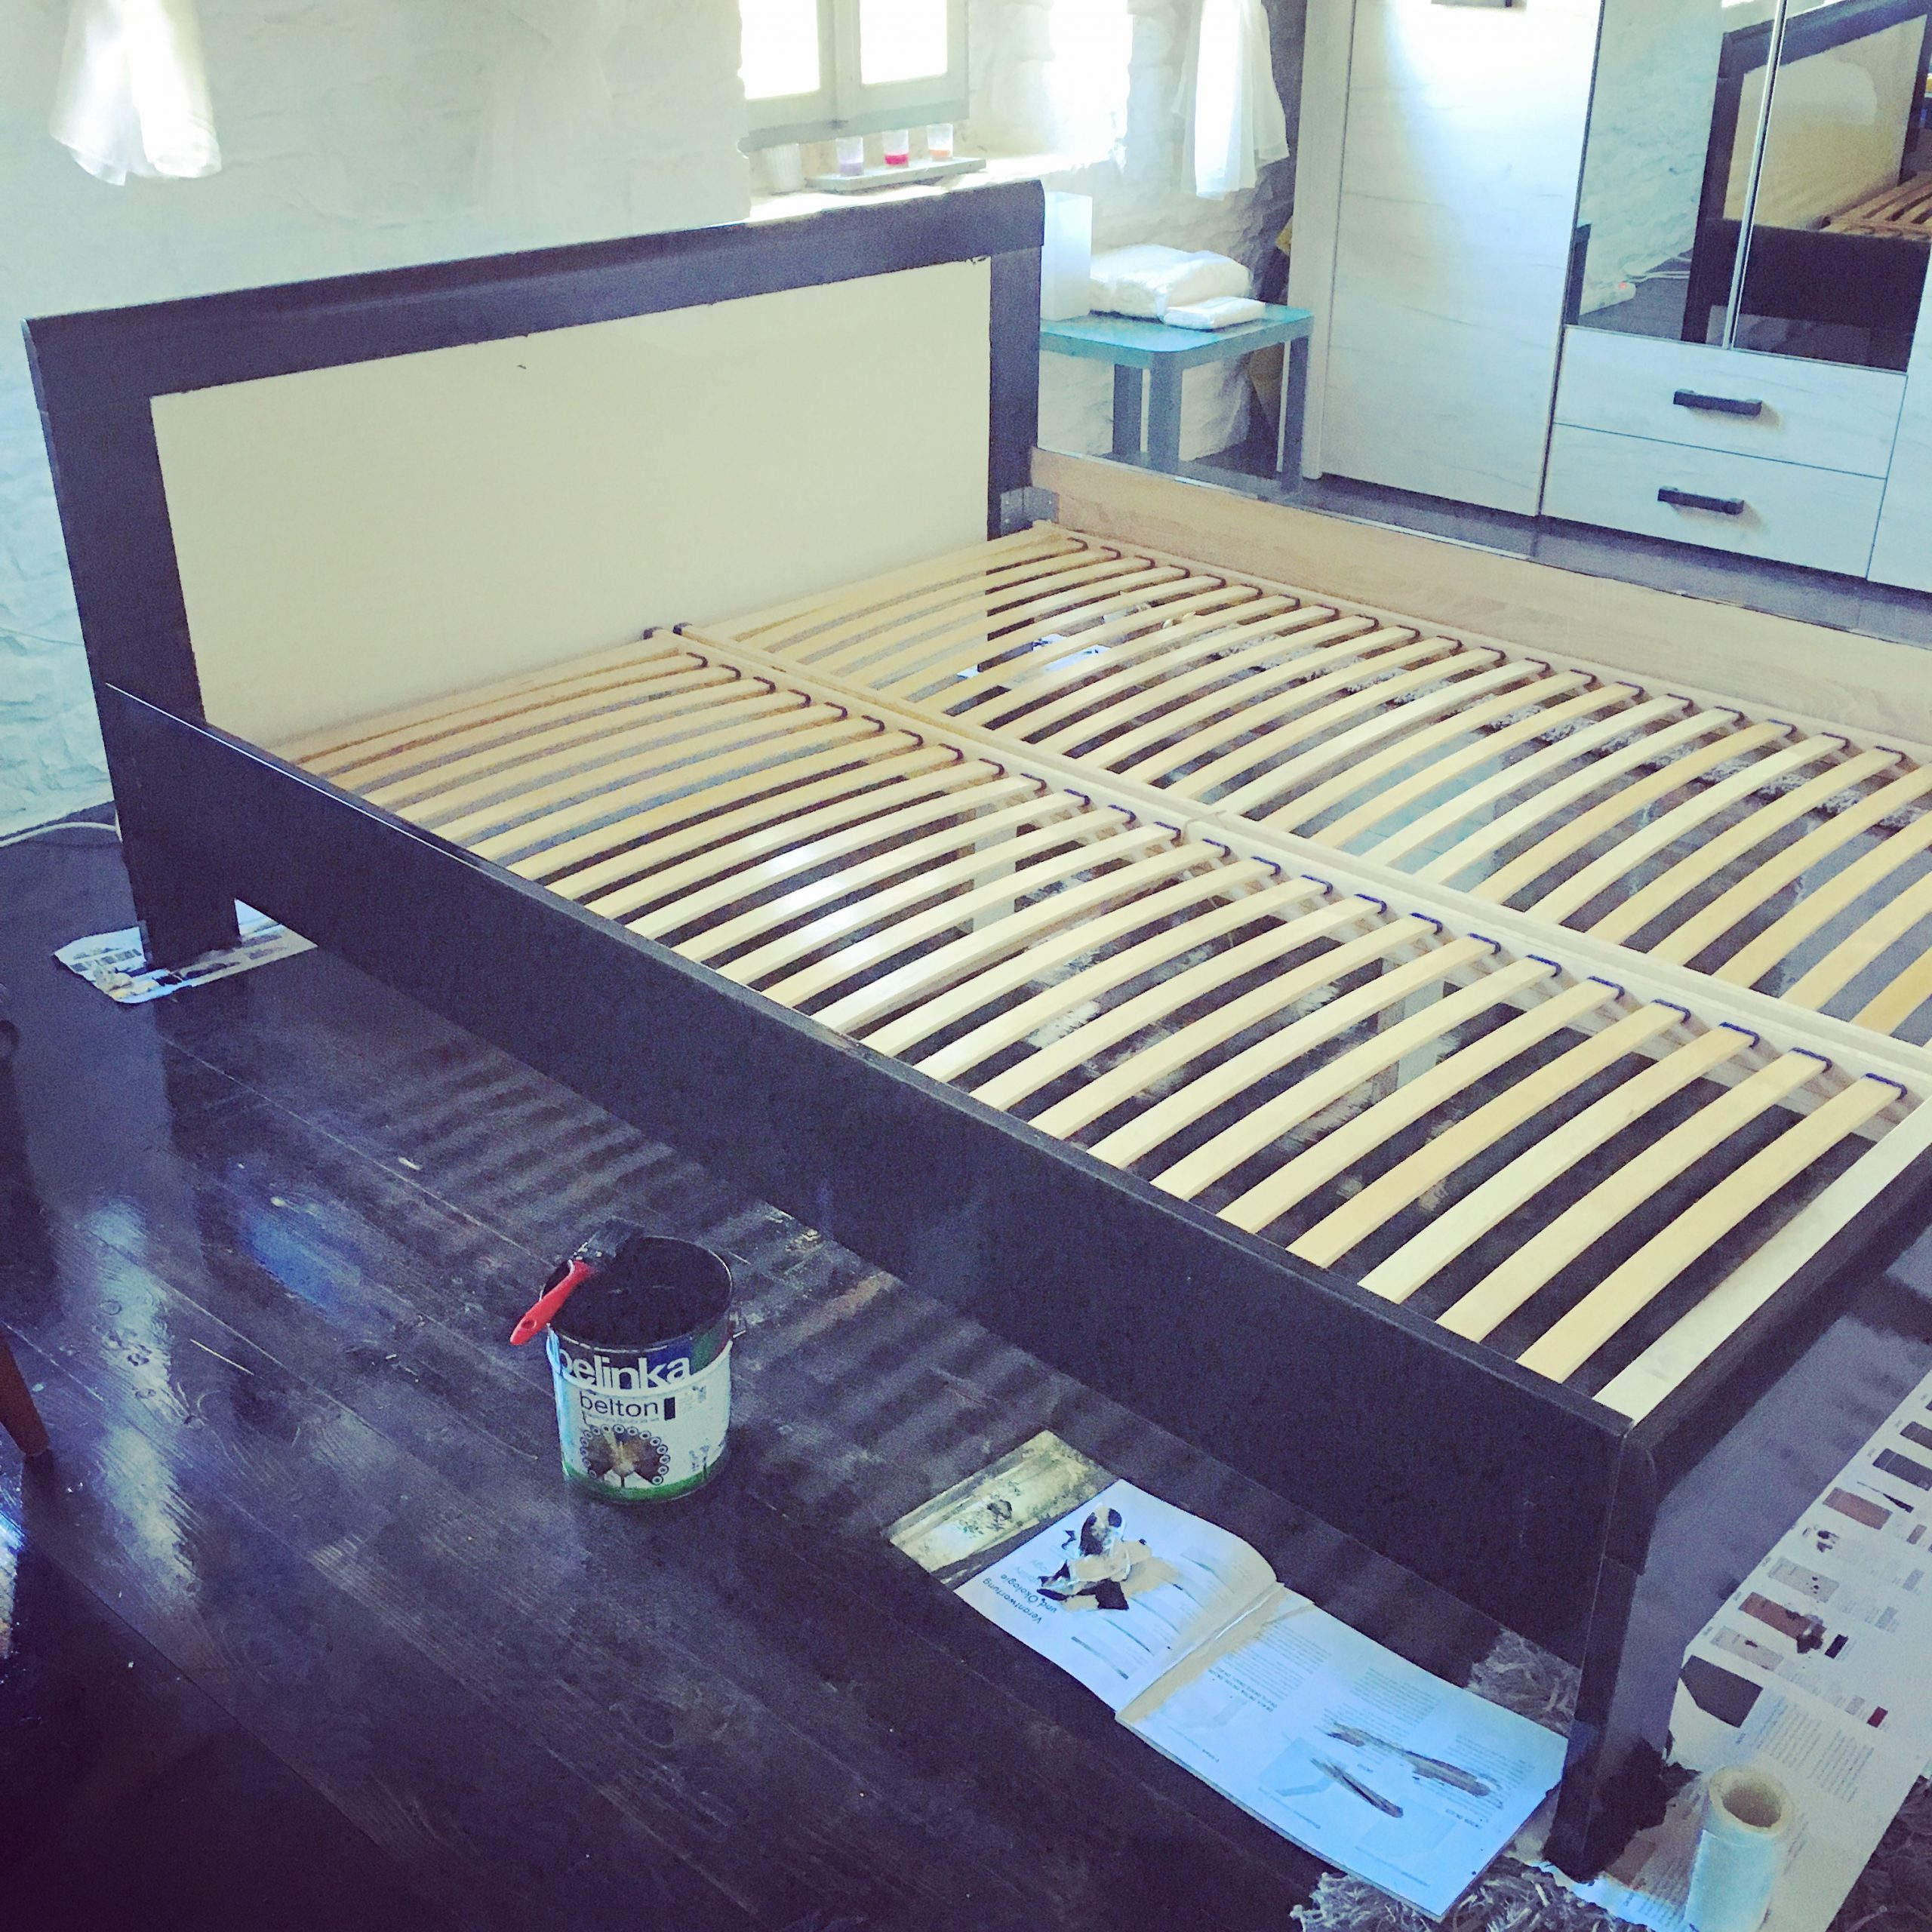 Upcycling the bed frame...